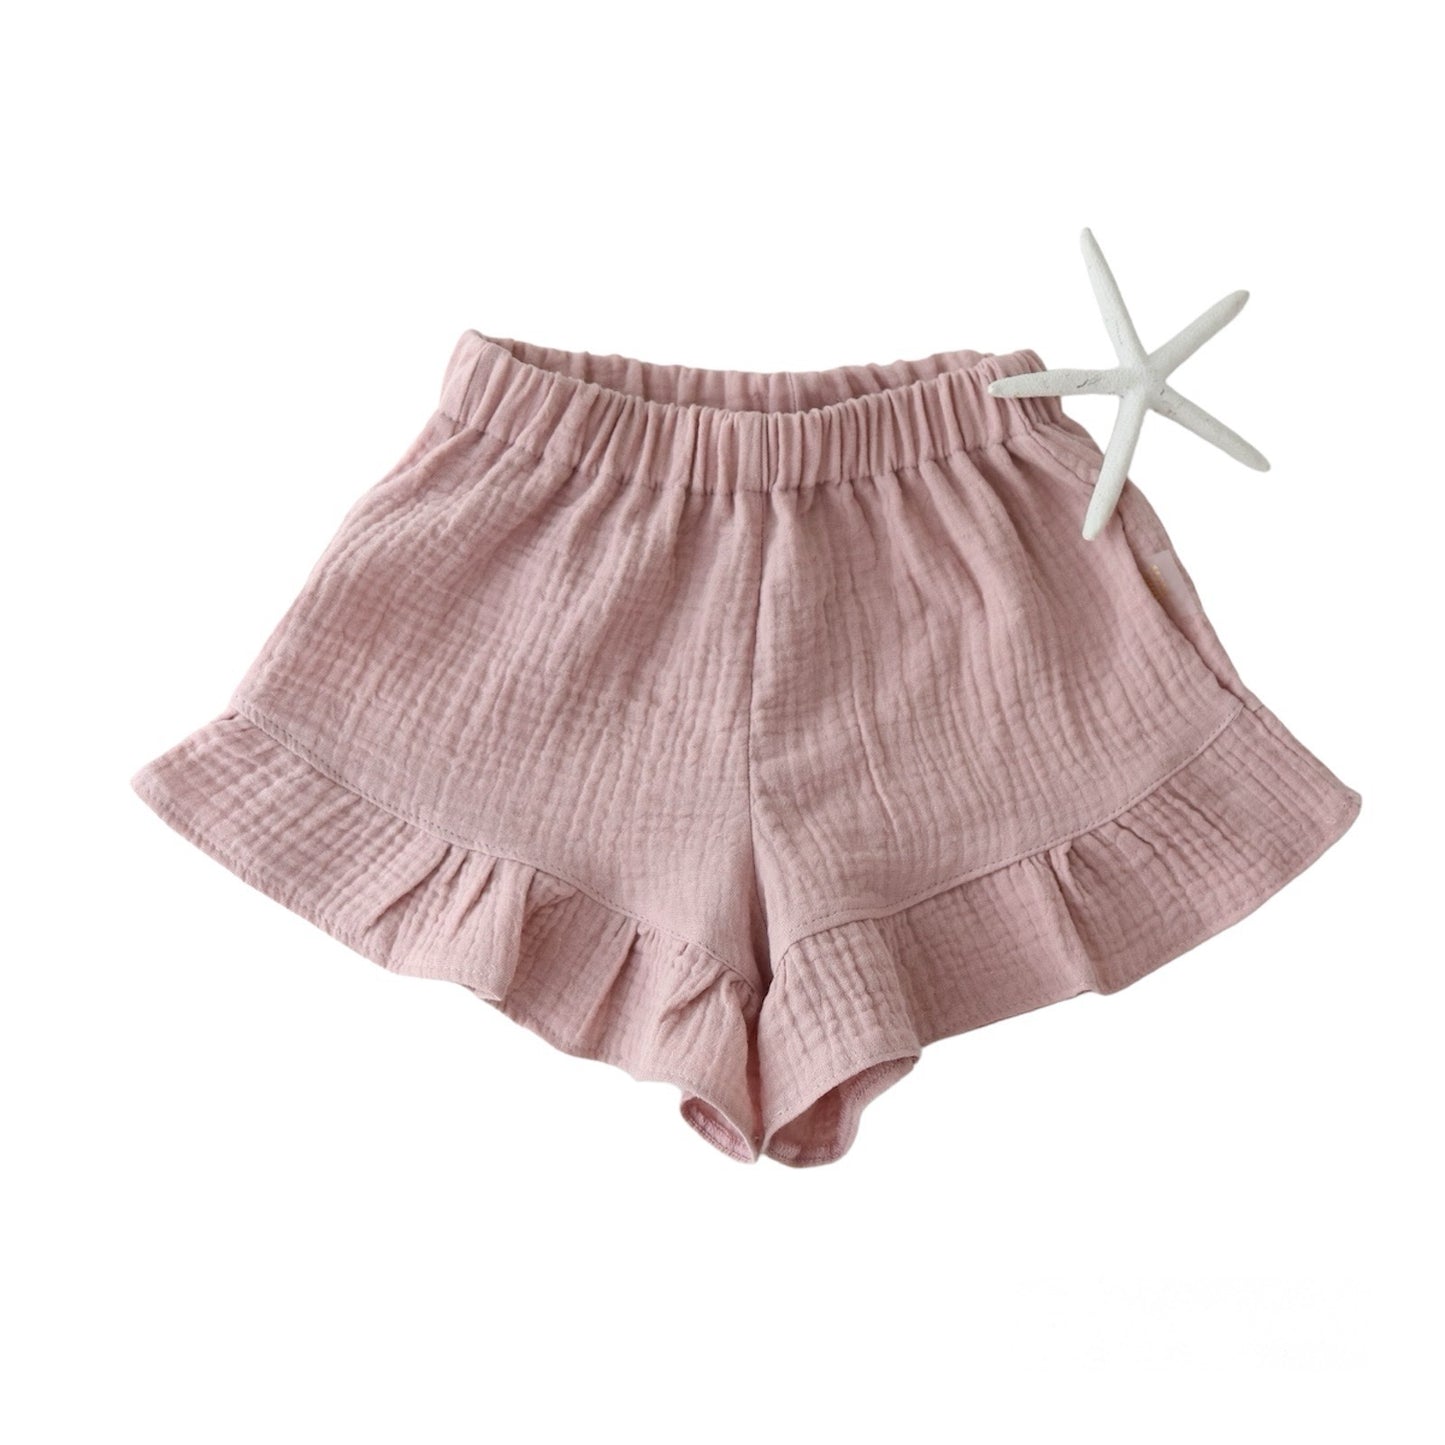 Muslin shorts with a ruffle - NUDE - LAST PAIR